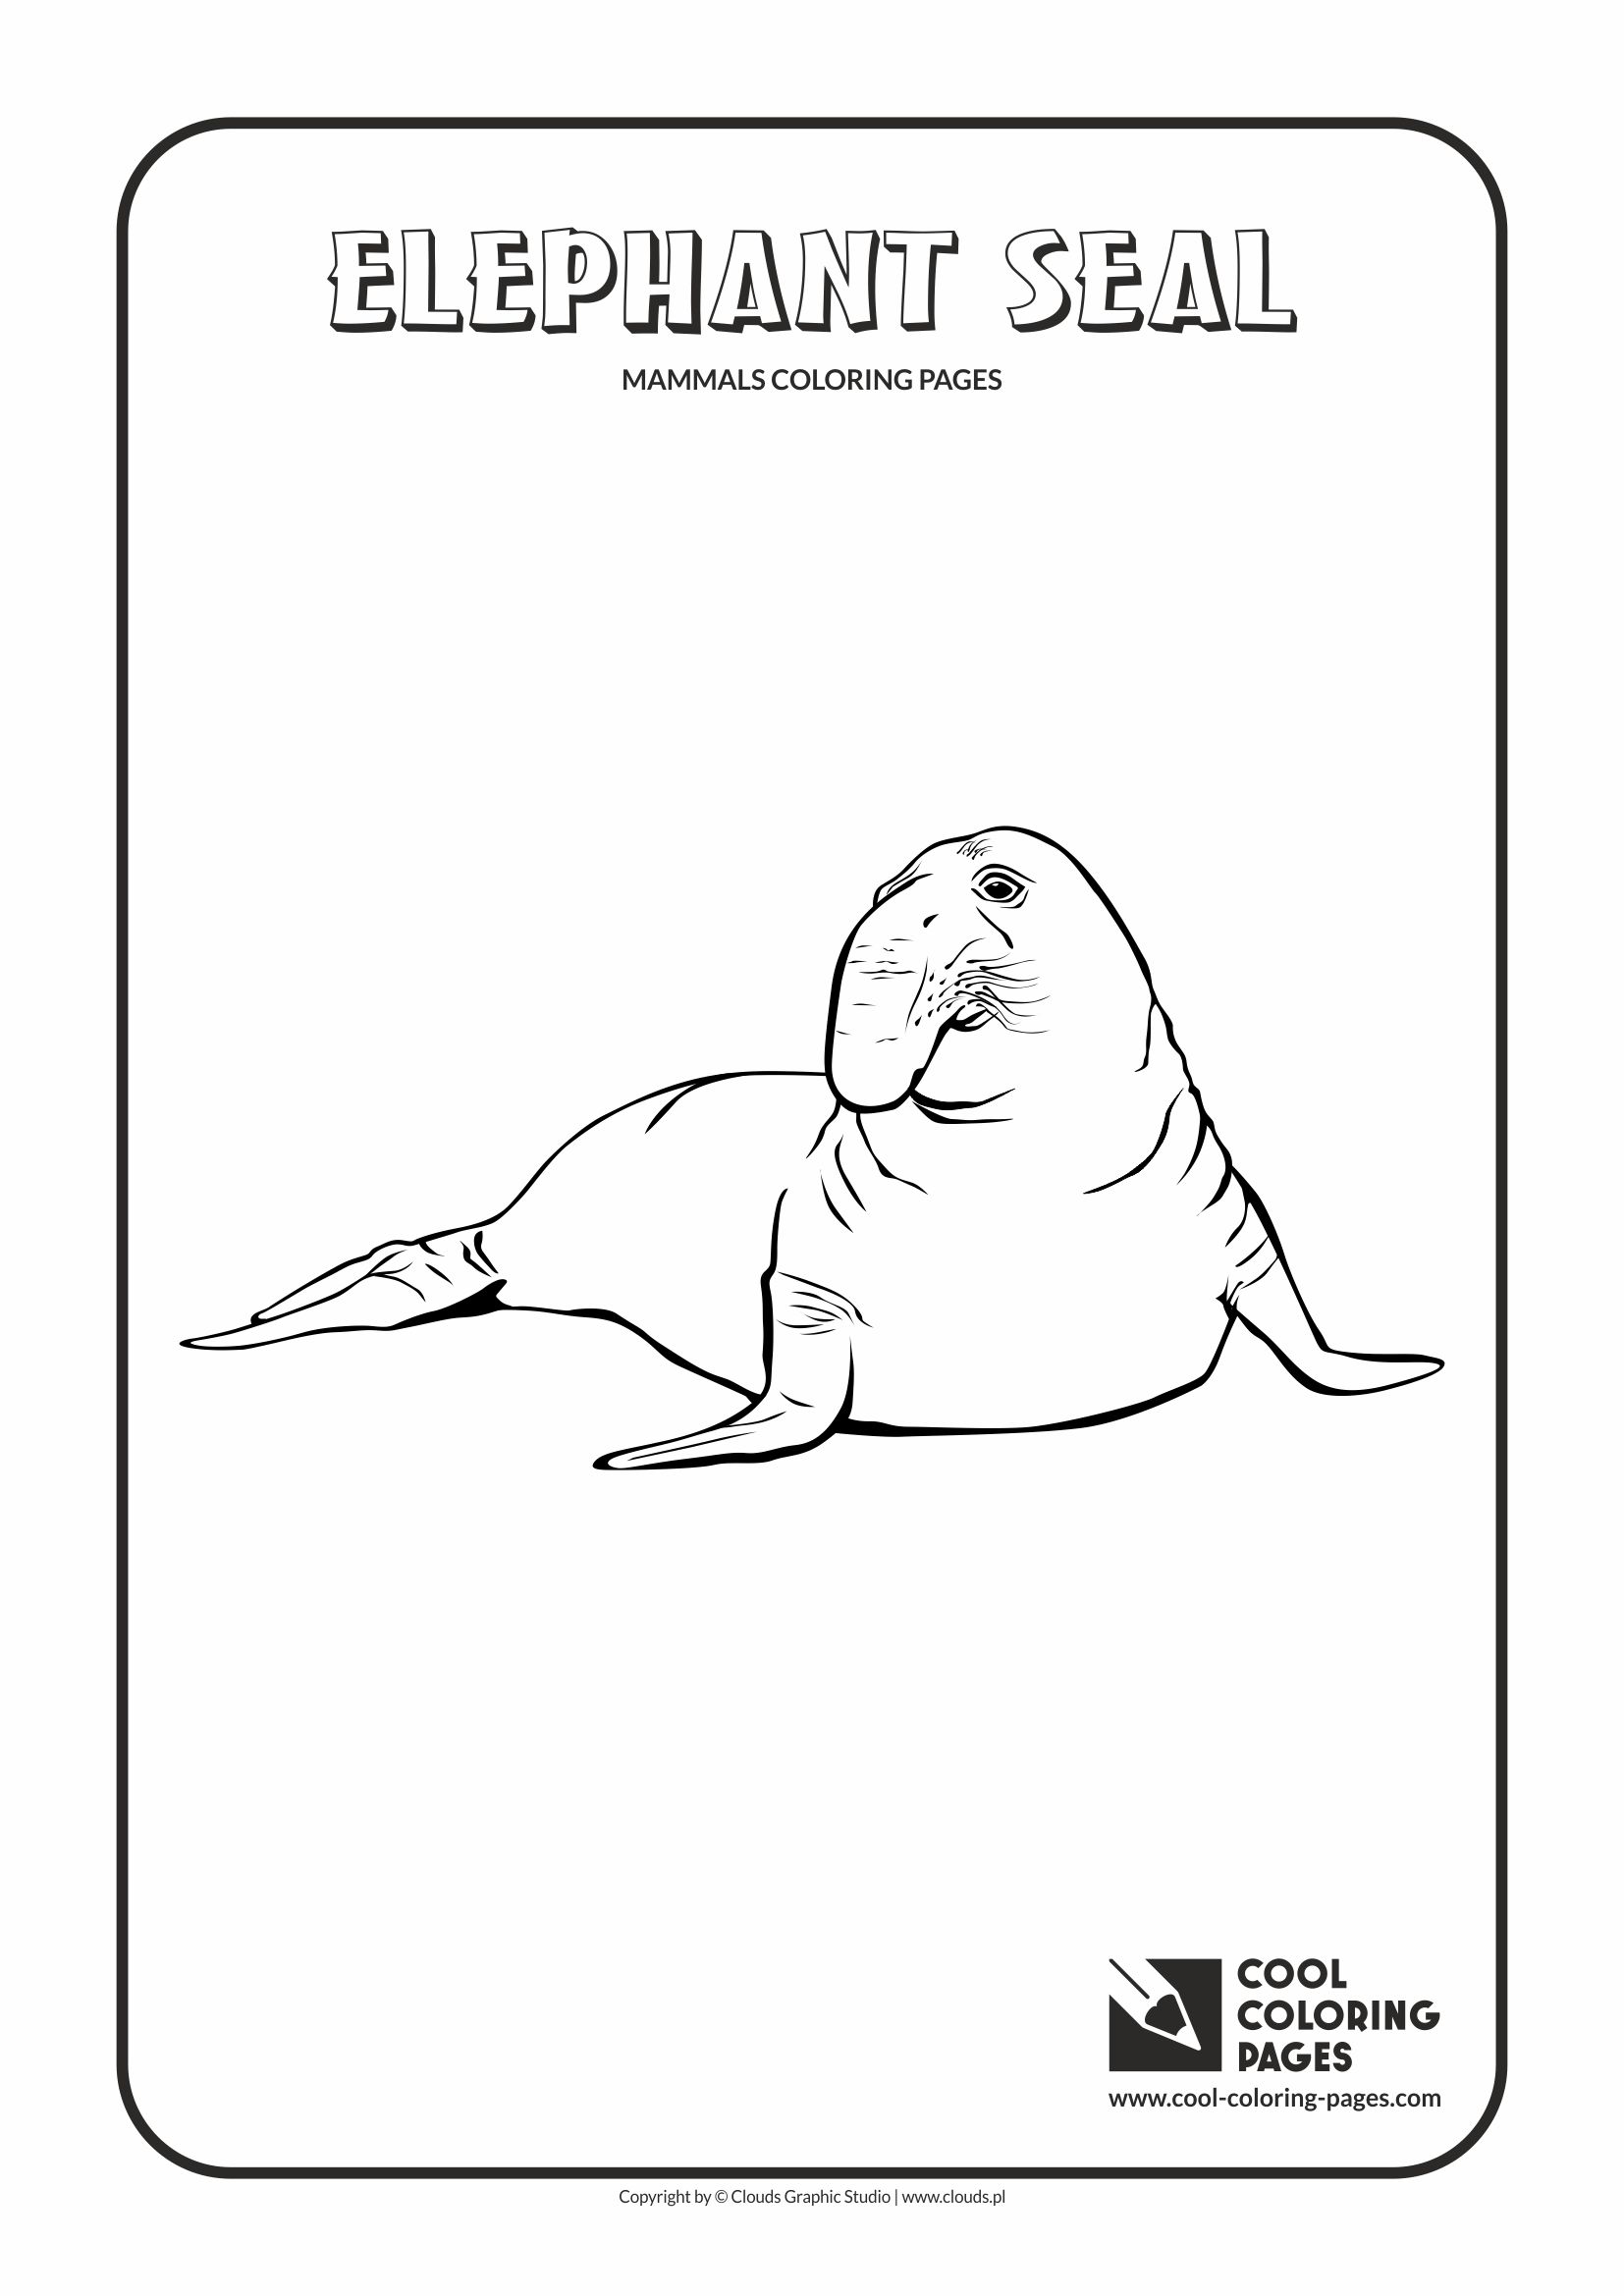 Cool Coloring Pages - Animals / Elephant seal / Coloring page with elephant seal